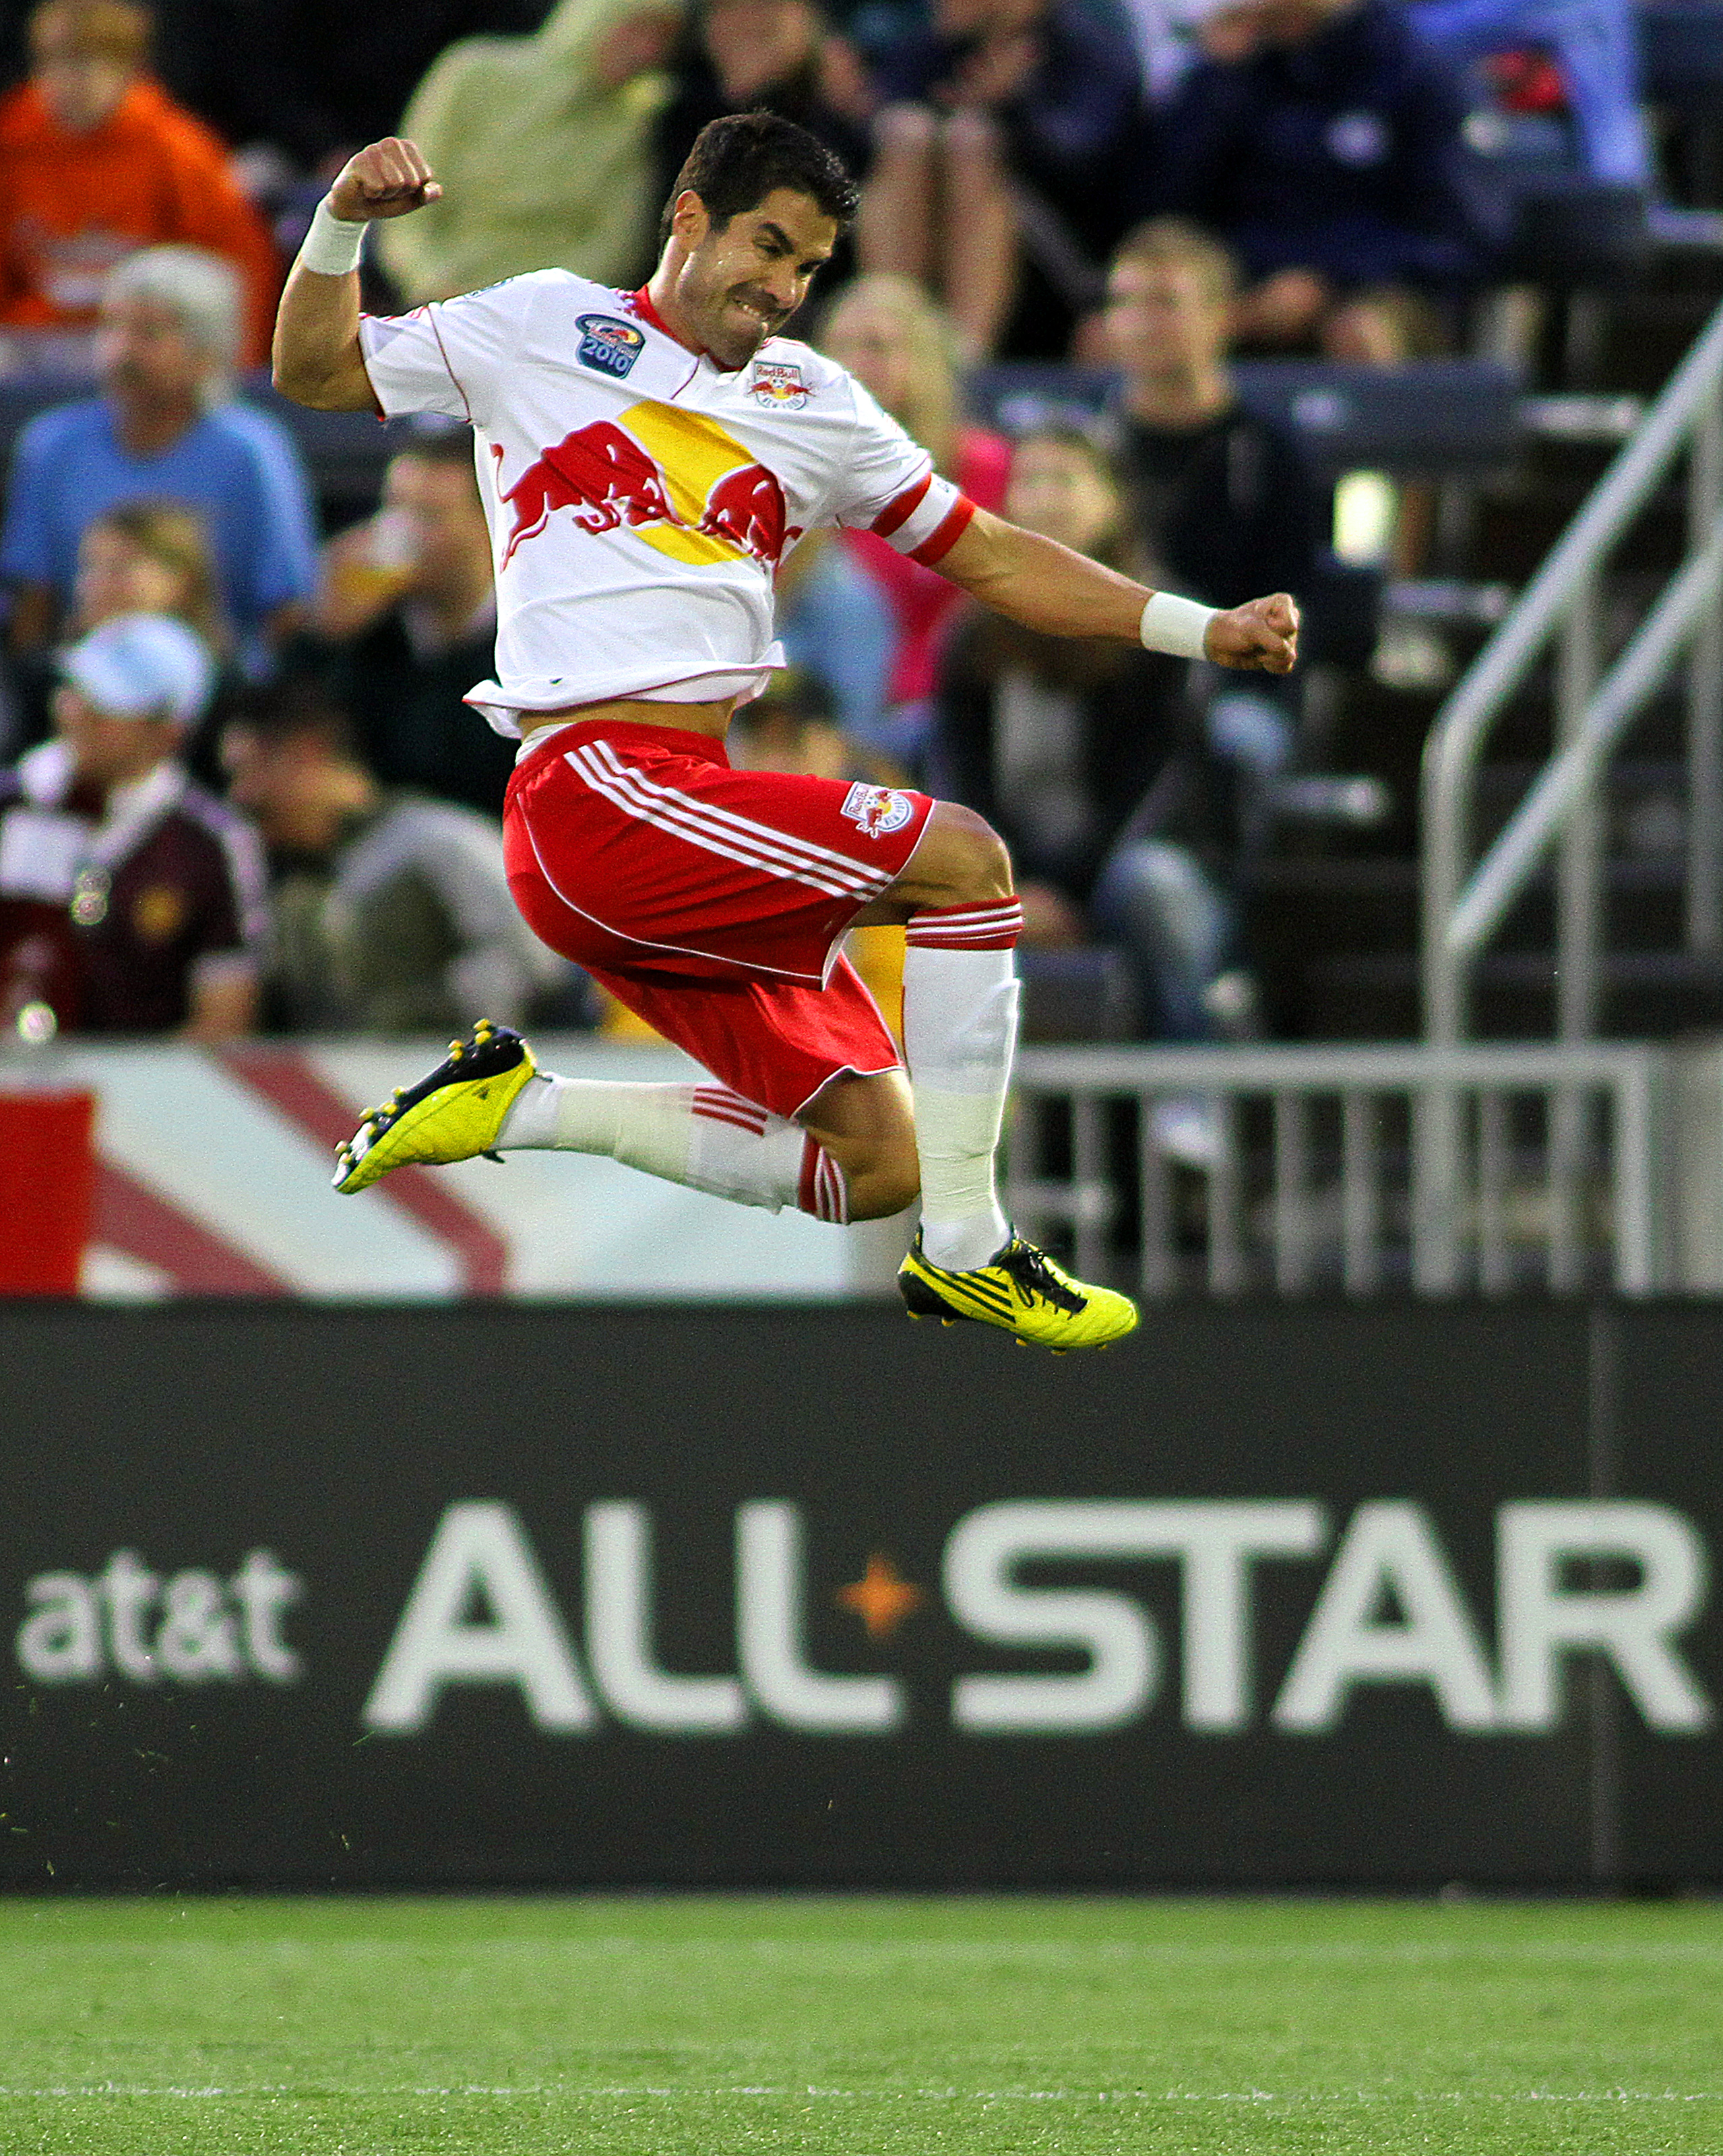 COMMERCE CITY, CO - JULY 4 : Juan Pablo Angel #9 of the New York Red Bulls celebrates a goal during the first half at Dick's Sporting Goods Park on July 4, 2010 in Commerce City, Colorado. (Photo by Marc Piscotty/Getty Images)